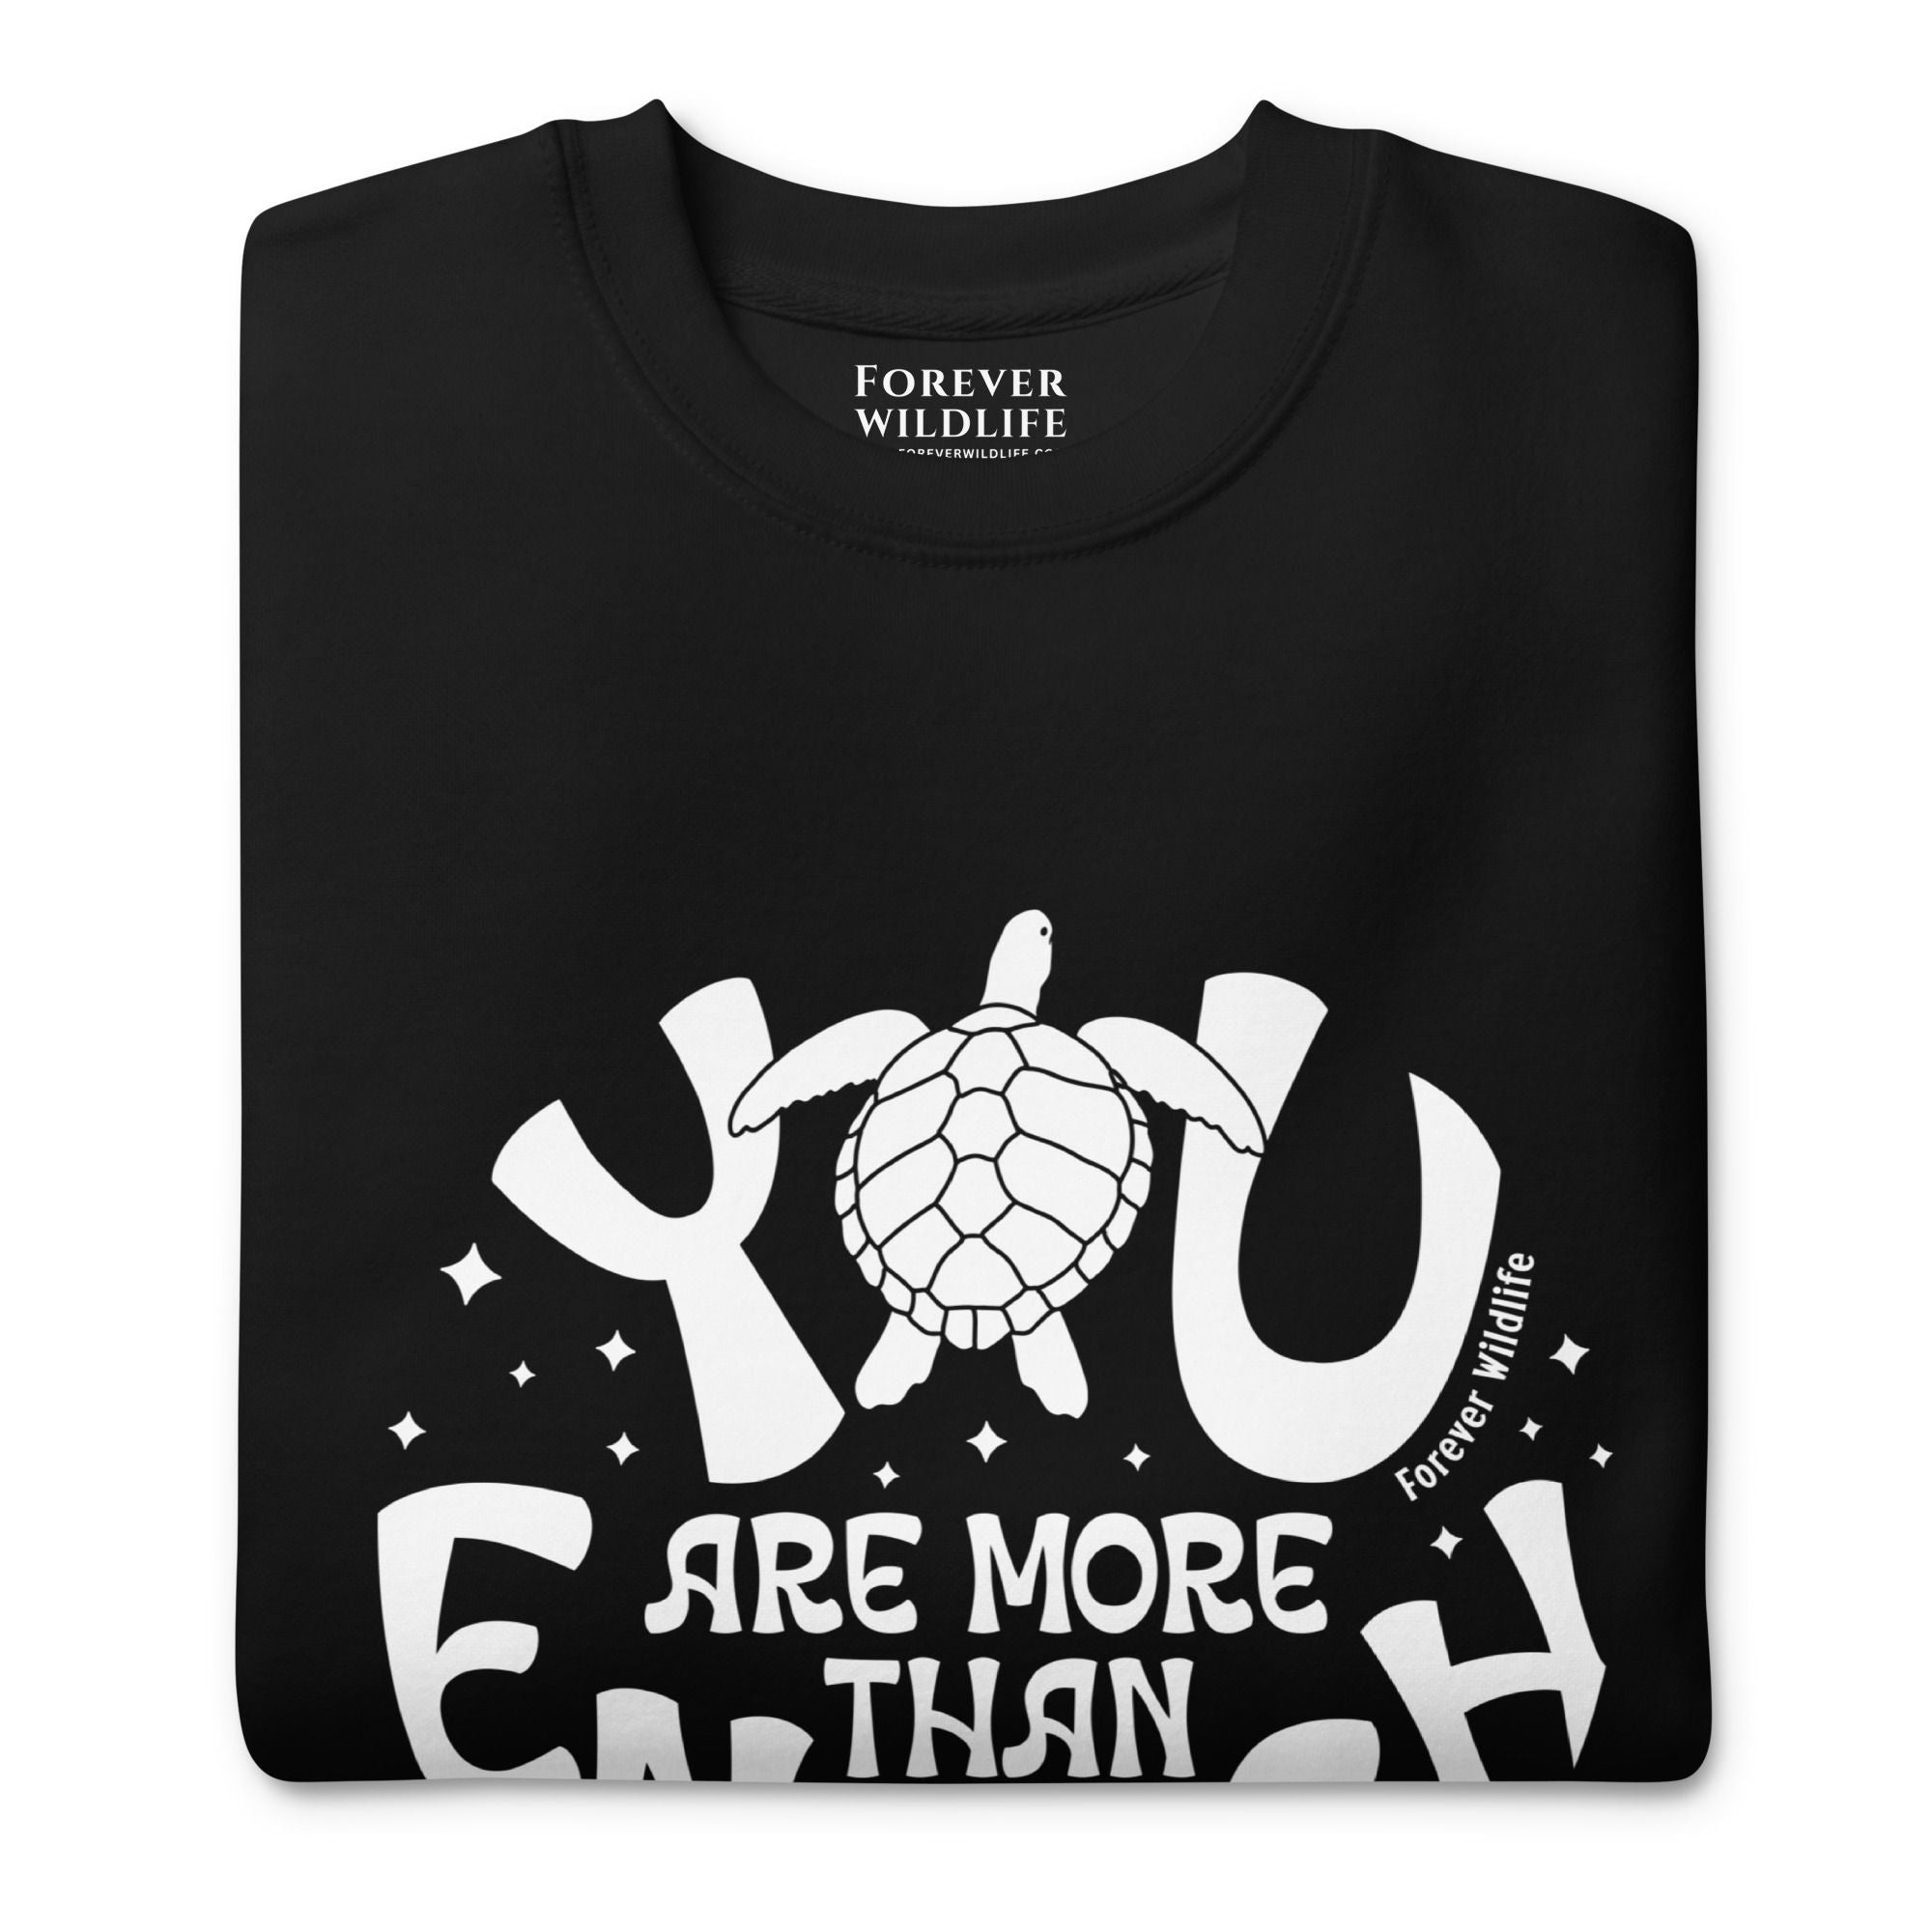 Sea Turtle Sweatshirt in Black-Premium Wildlife Animal Inspiration Sweatshirt Design with 'You Are More Than Enough' text, part of Wildlife Sweatshirts & Clothing from Forever Wildlife.